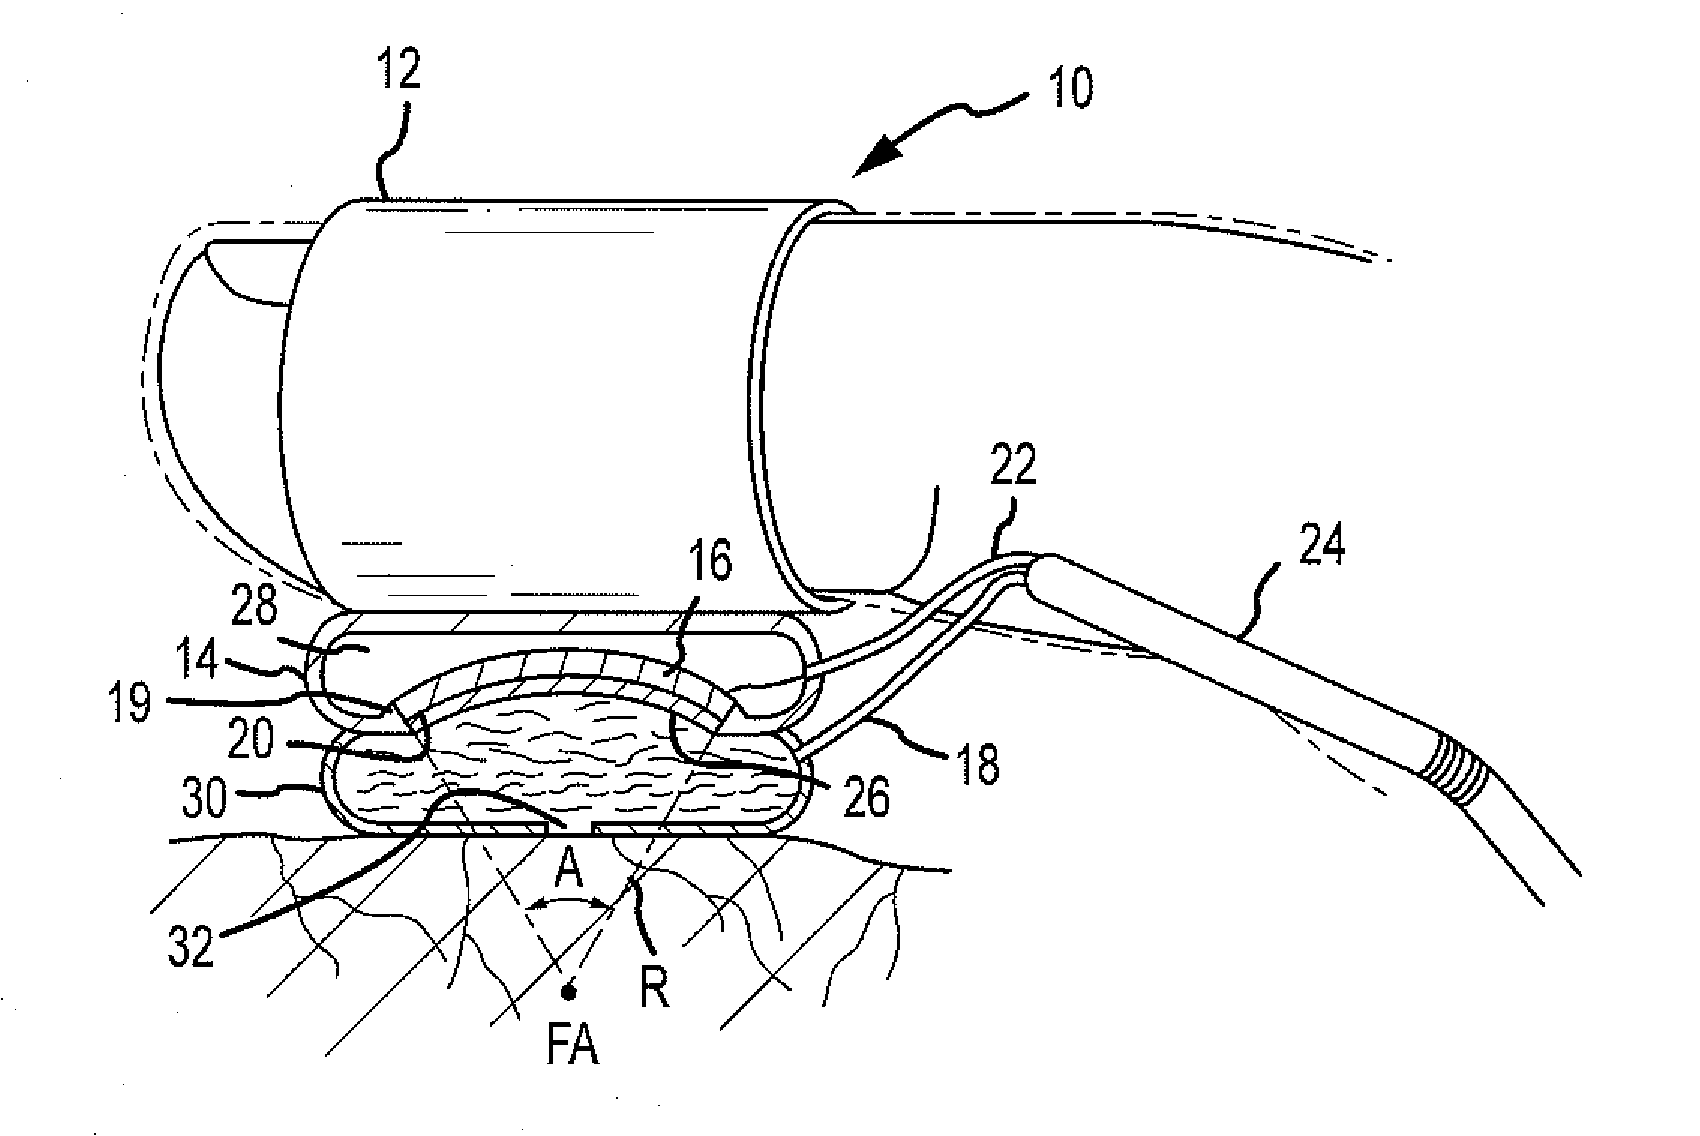 Finger-mounted or robot-mounted transducer device